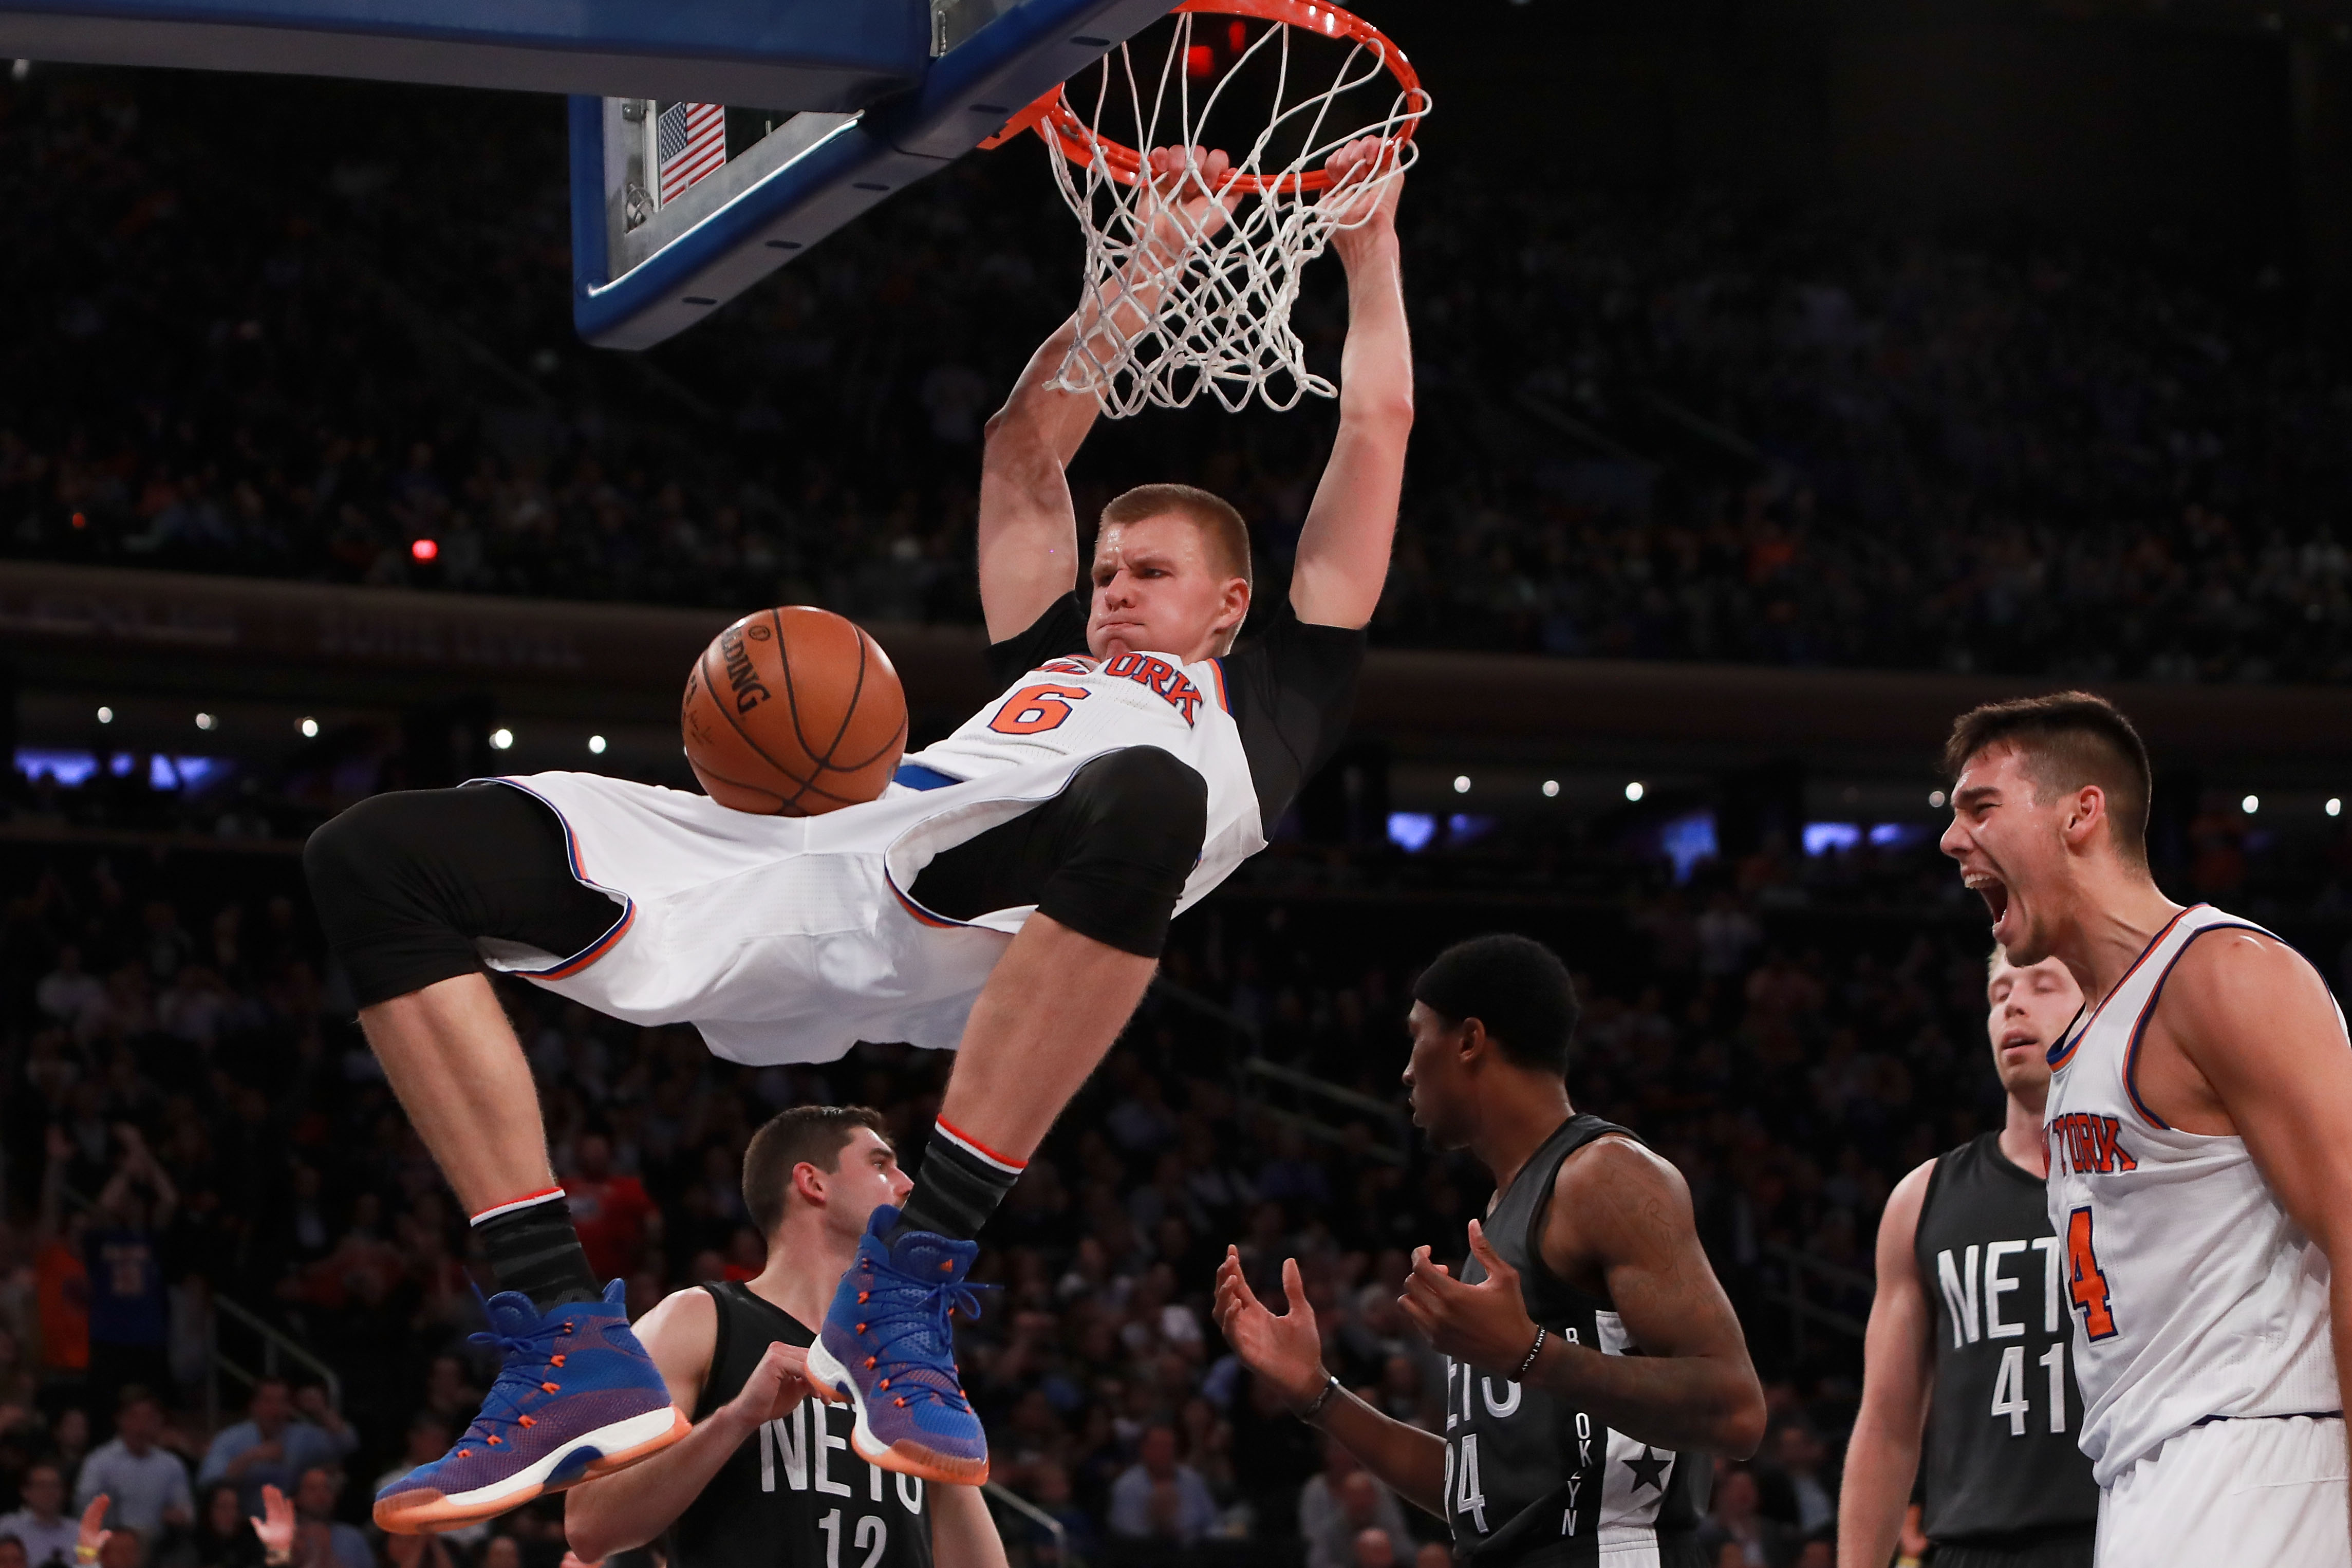 NEW YORK, NY - NOVEMBER 09: Kristaps Porzingis #6 of the New York Knicks dunks against the Brooklyn Nets during the second half at Madison Square Garden on November 9, 2016 in New York City. NOTE TO USER: User expressly acknowledges and agrees that, by downloading and or using this photograph, User is consenting to the terms and conditions of the Getty Images License Agreement.   Michael Reaves/Getty Images/AFP